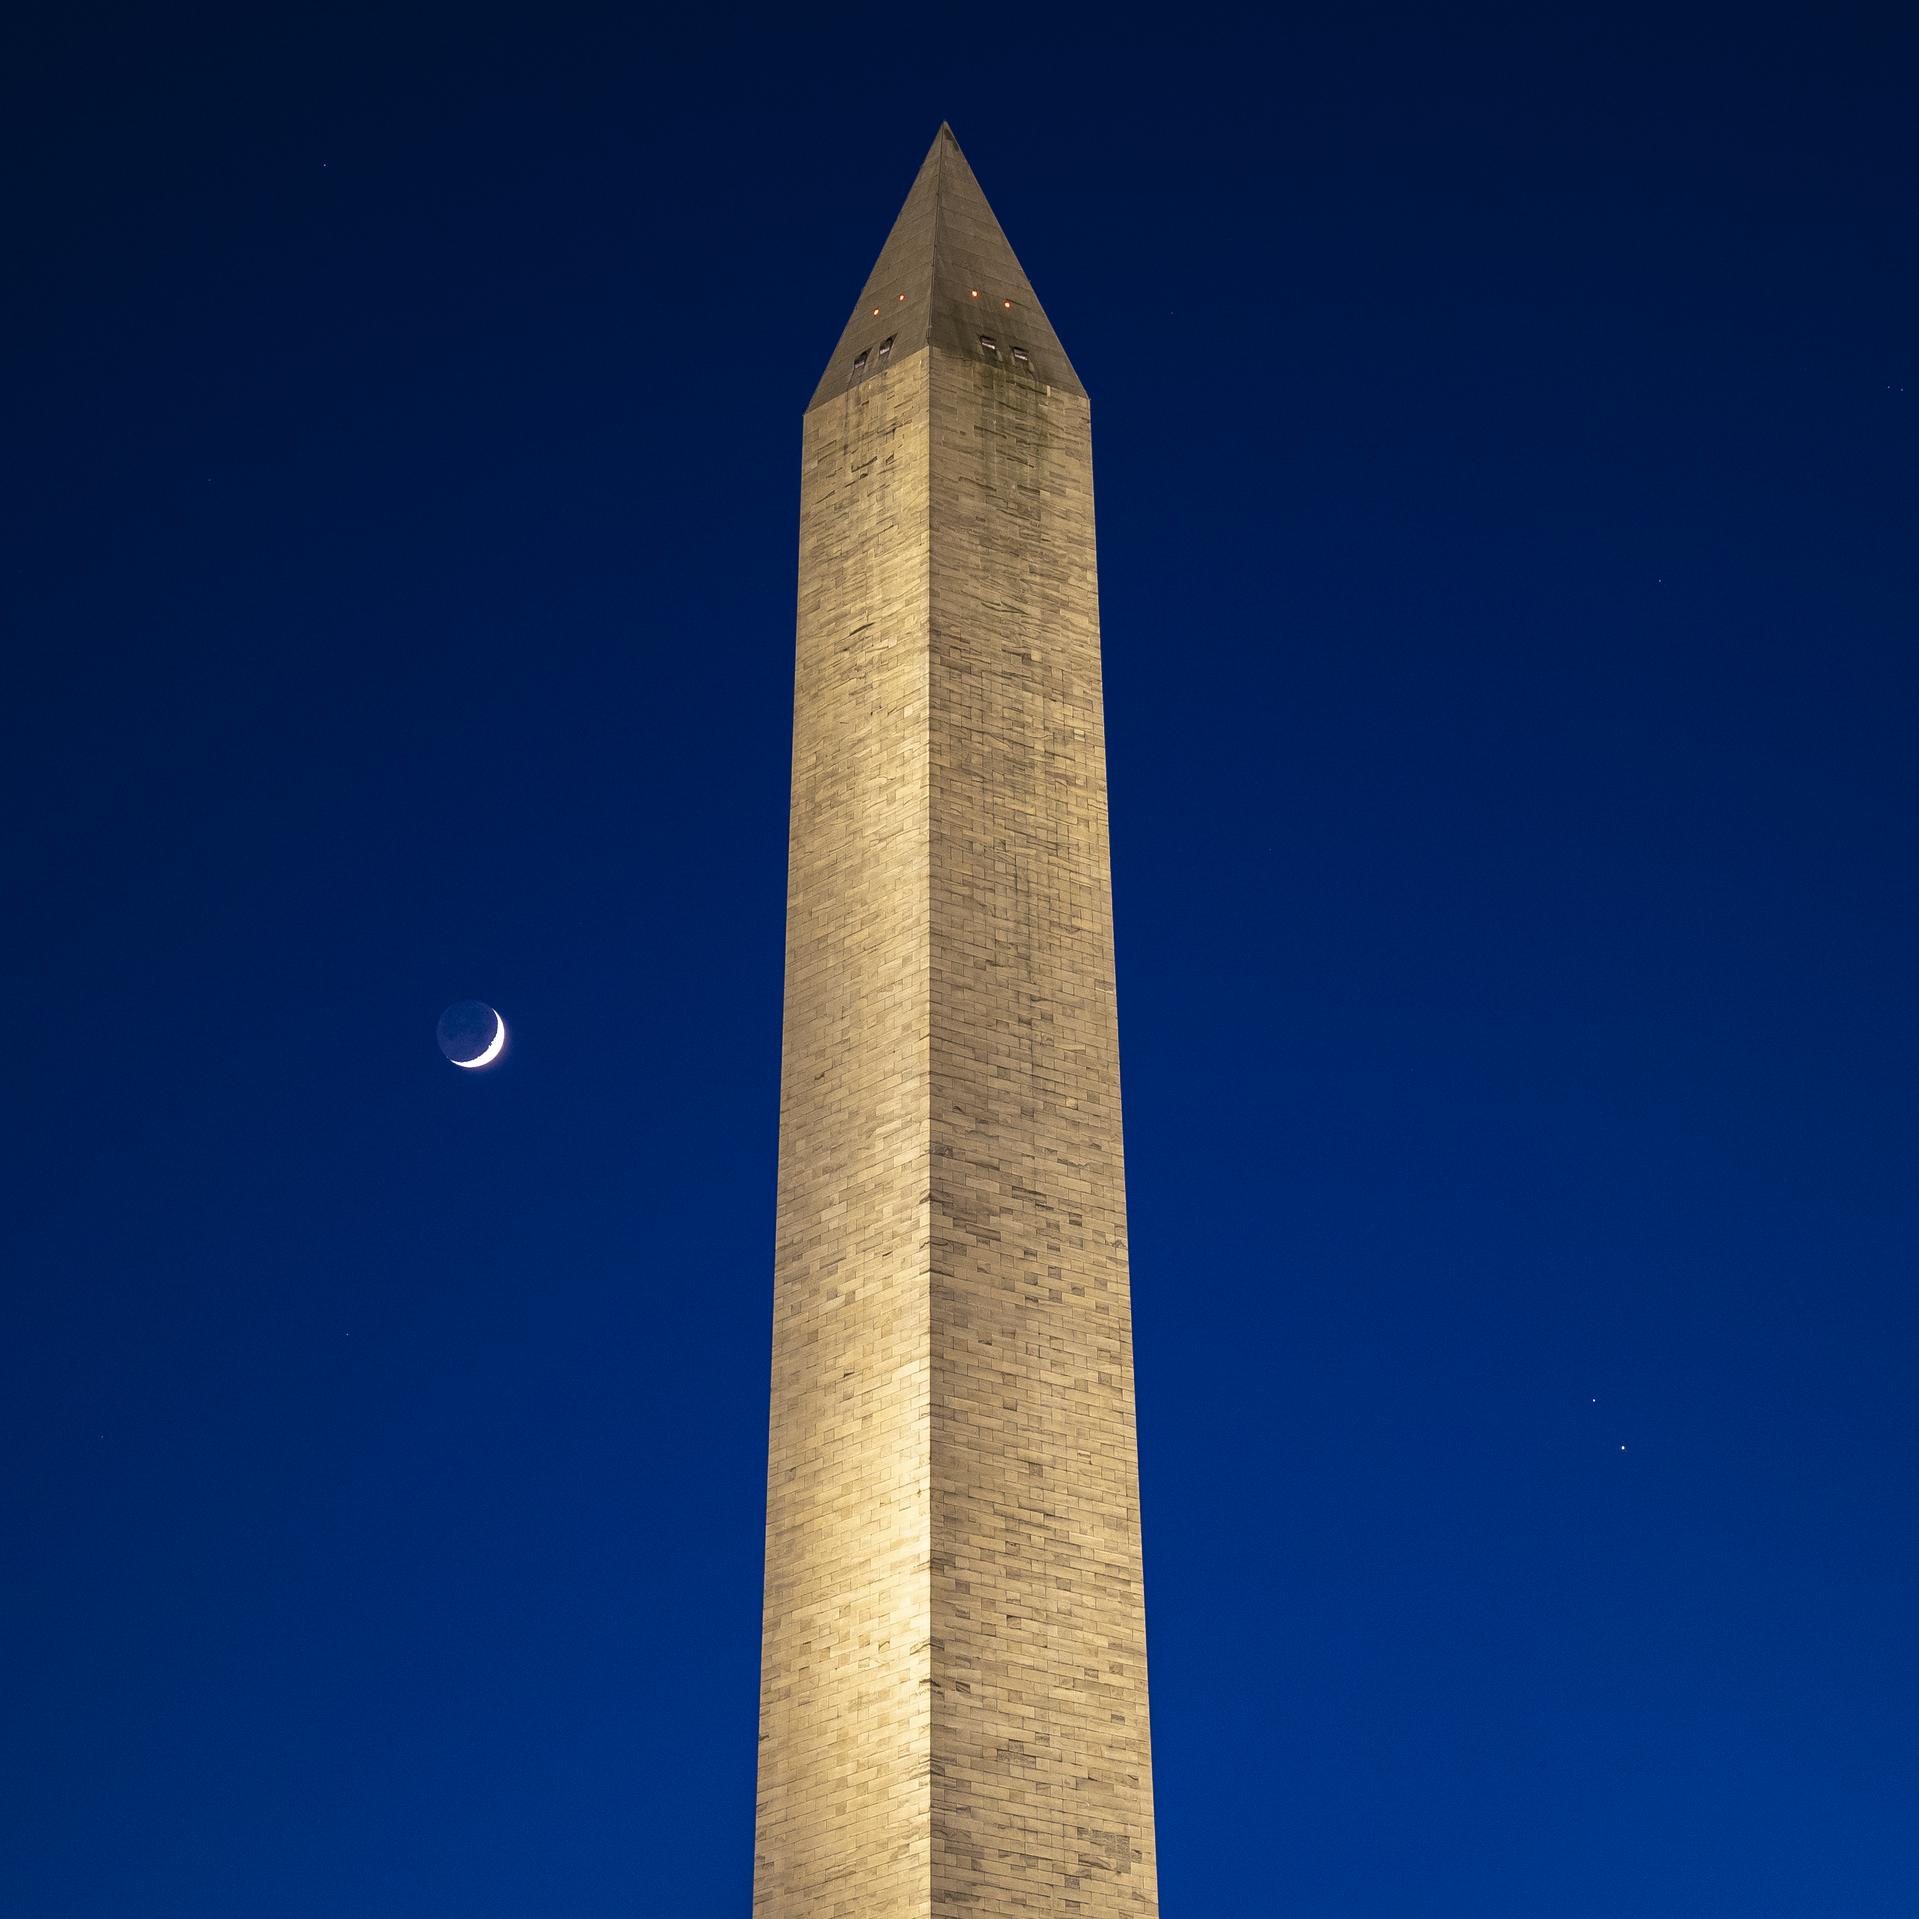 The Washington Monument - a tall, white rectangular monument with a pyramid at the top - is in the center of this image. The Moon (left), Saturn (upper right), and Jupiter (lower right) are in the night sky.